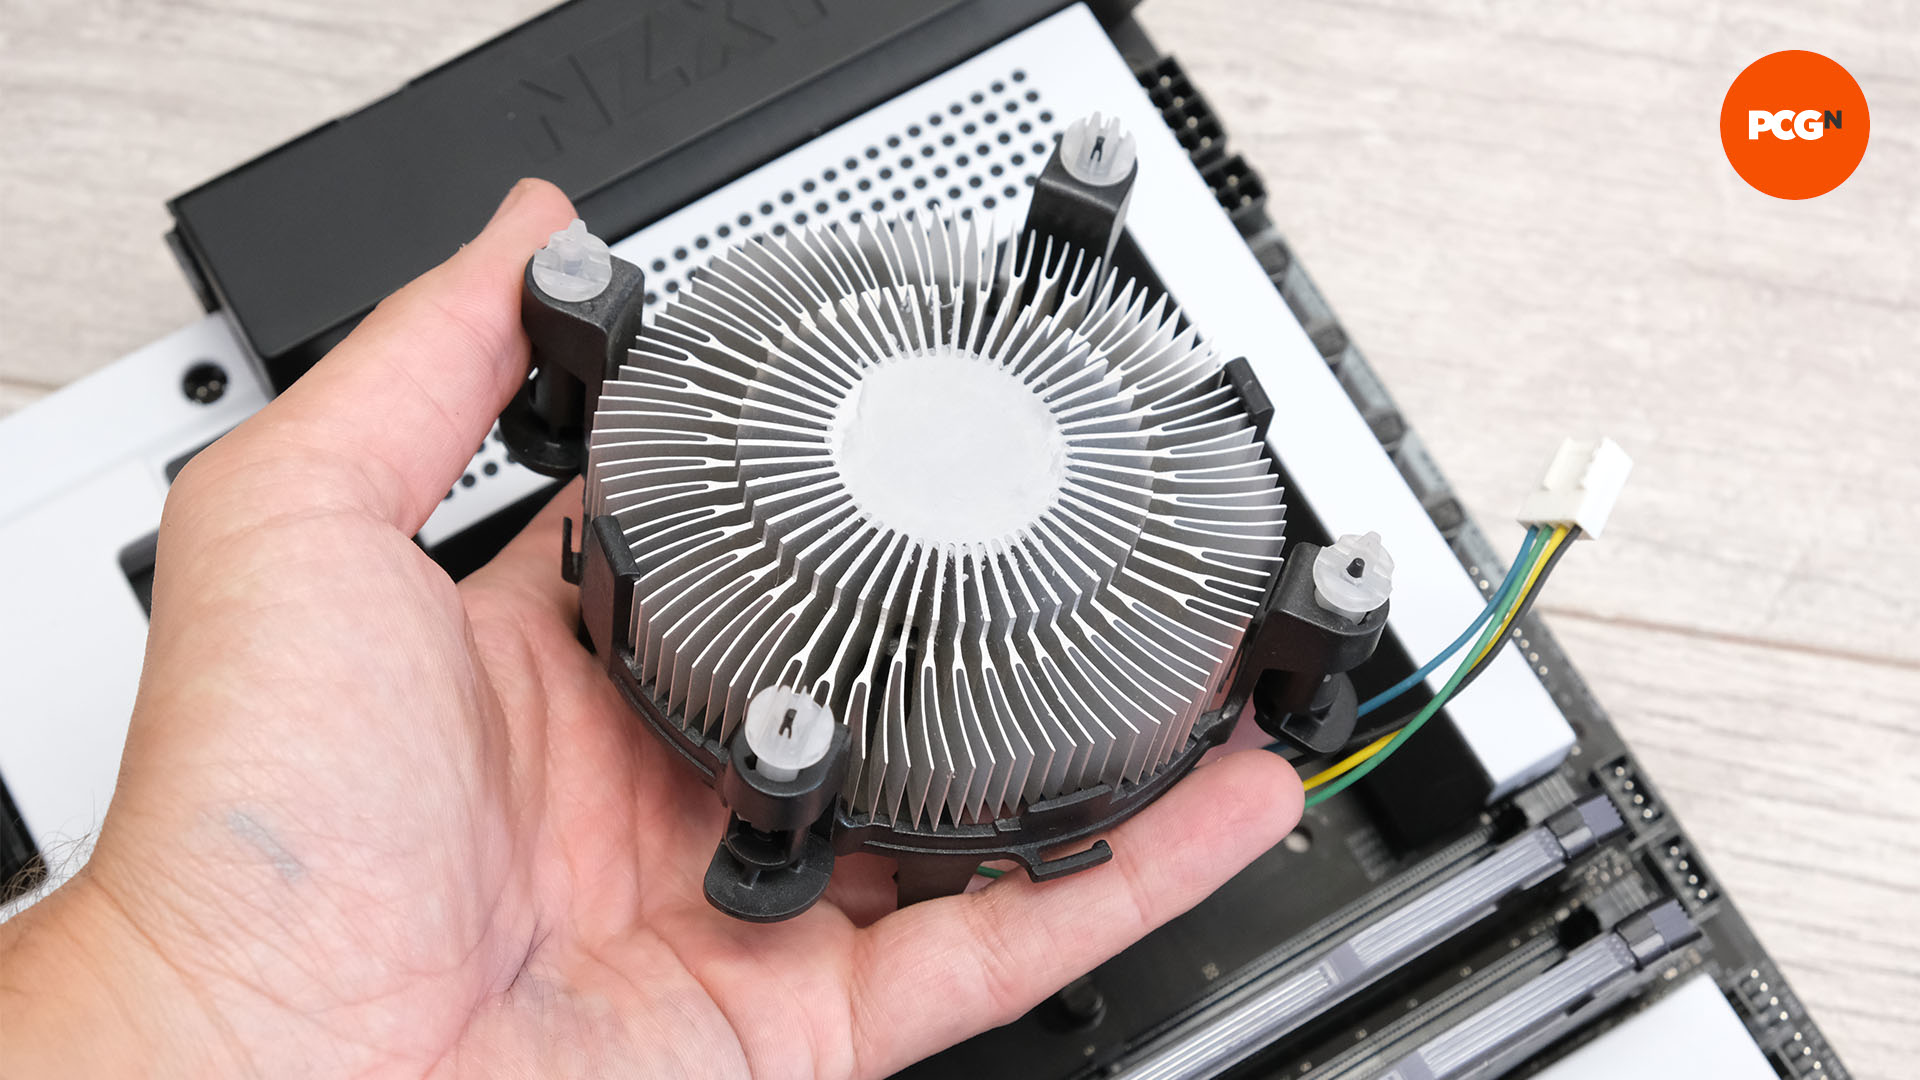 A CPU cooler in someone's hand ready for mounting on the motherboard